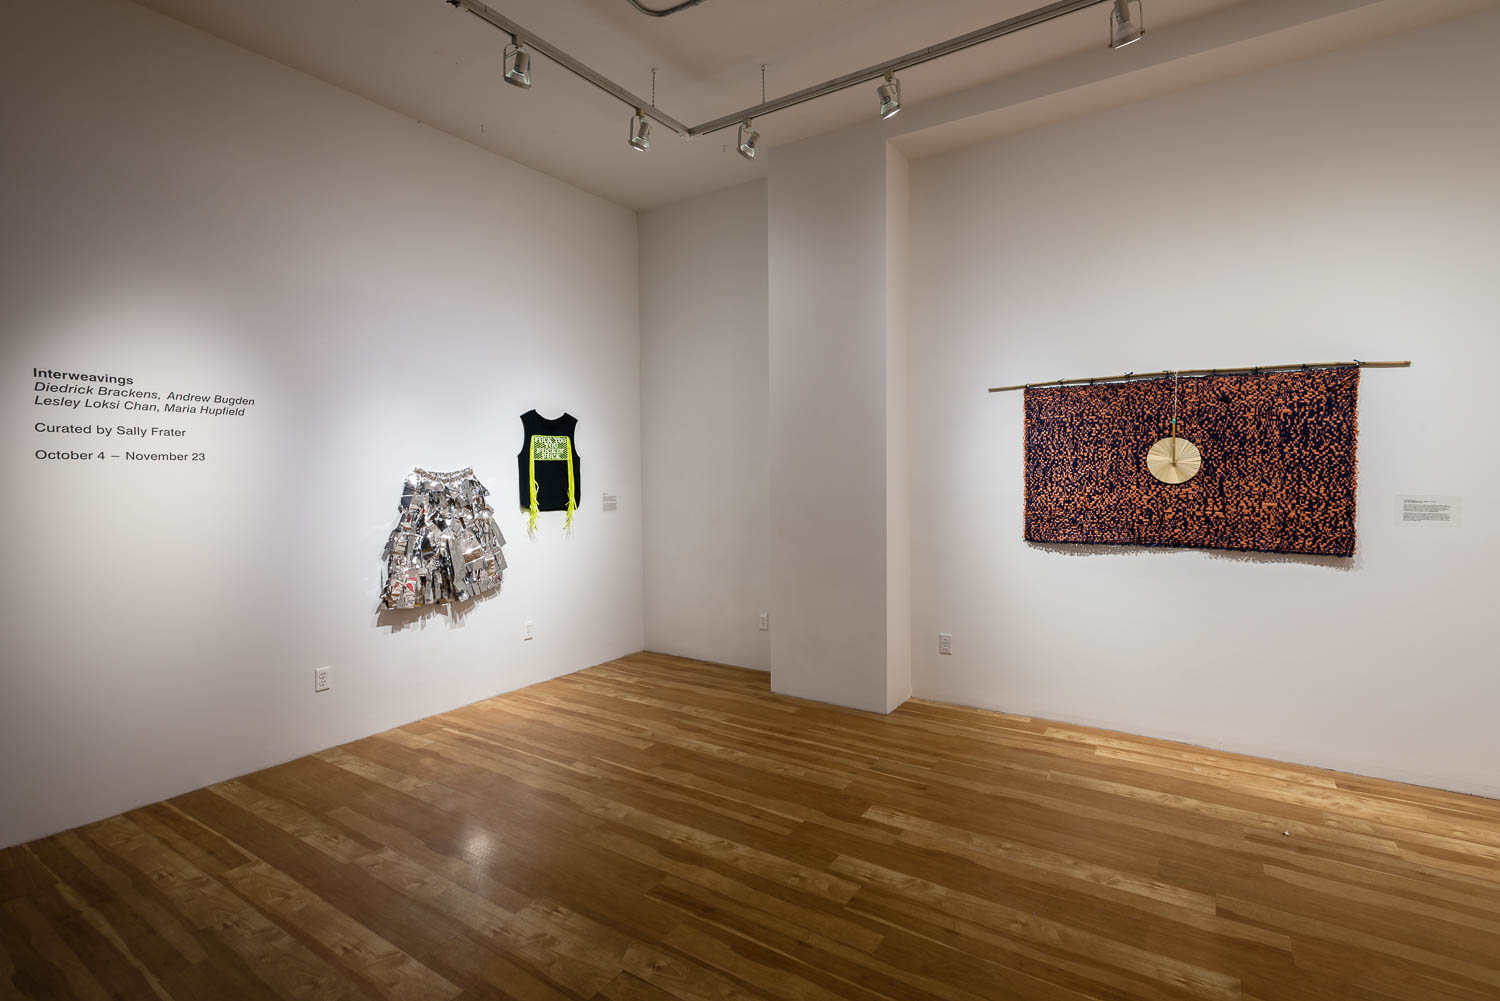 Installation view of the exhibition "Interweavings."